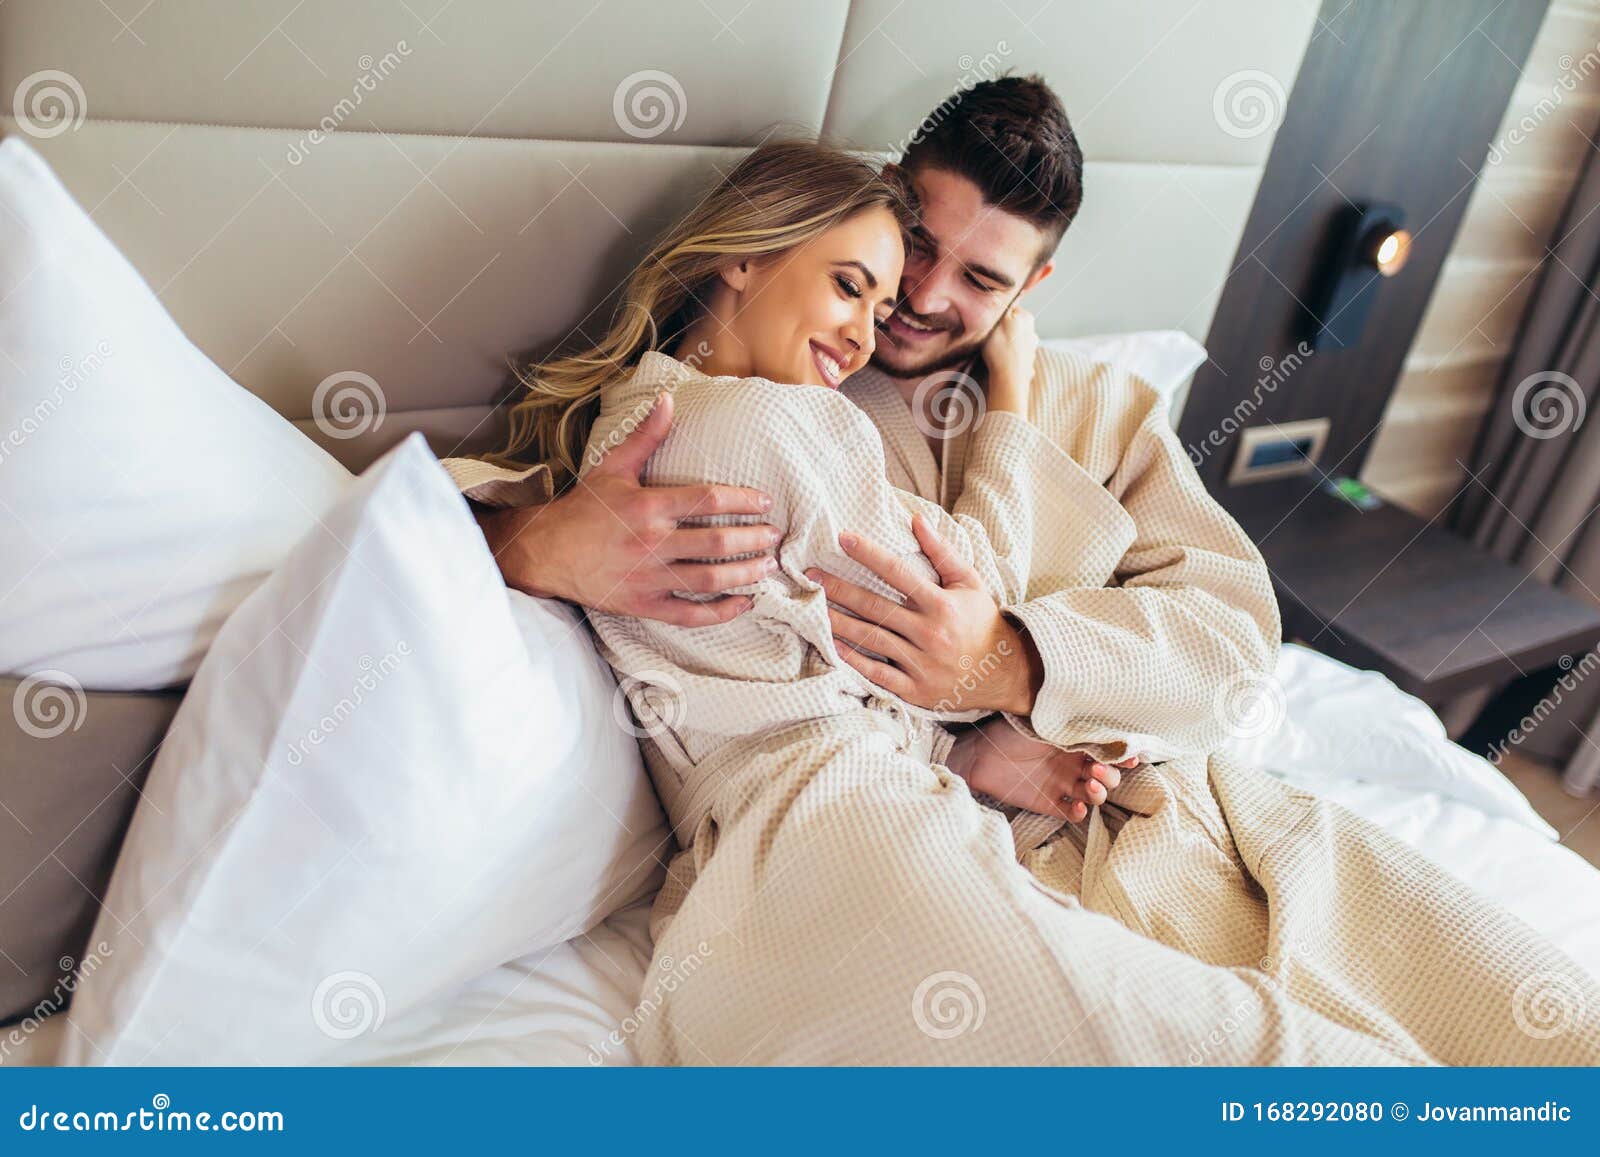 Couple In Bathrobes Lying On Bed In Hotel Room Stock Photo Image Of